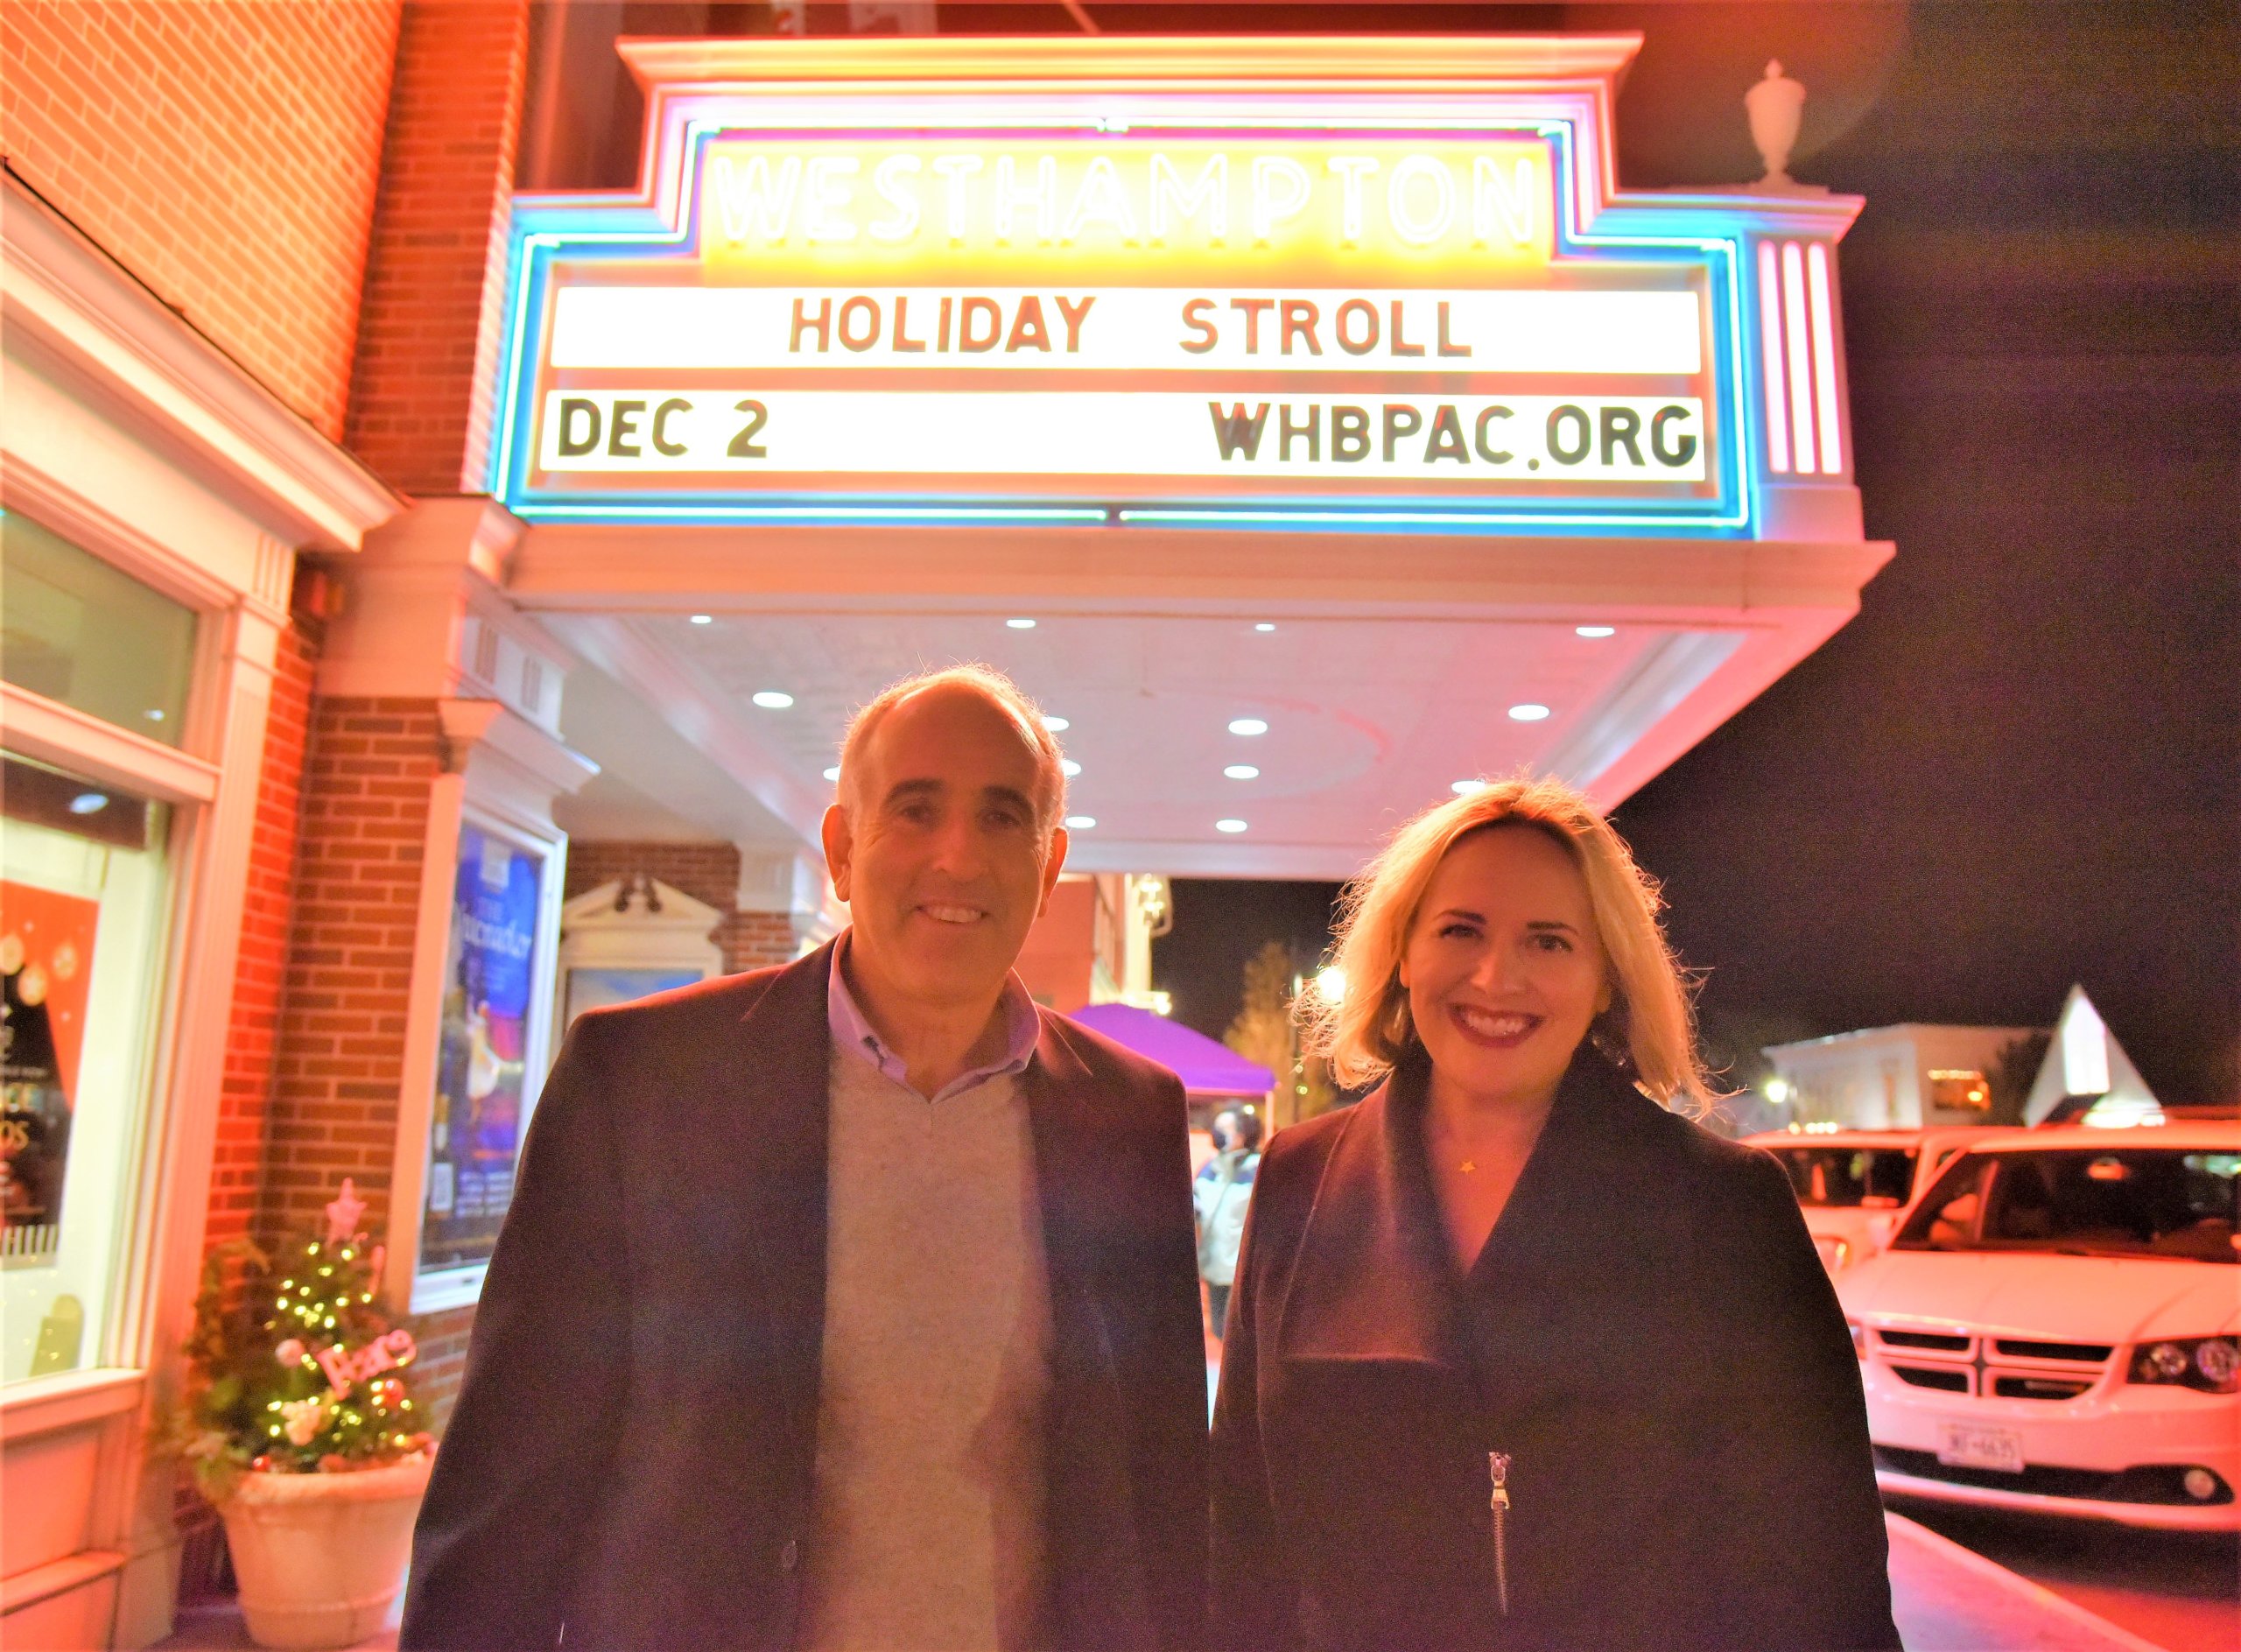 Southampton Town Supervisor Jay Schneiderman and WHBPAC Executive Director Julienne Penza-Boone on the WHBPAC Westhampton Beach Holiday Stroll in 2021